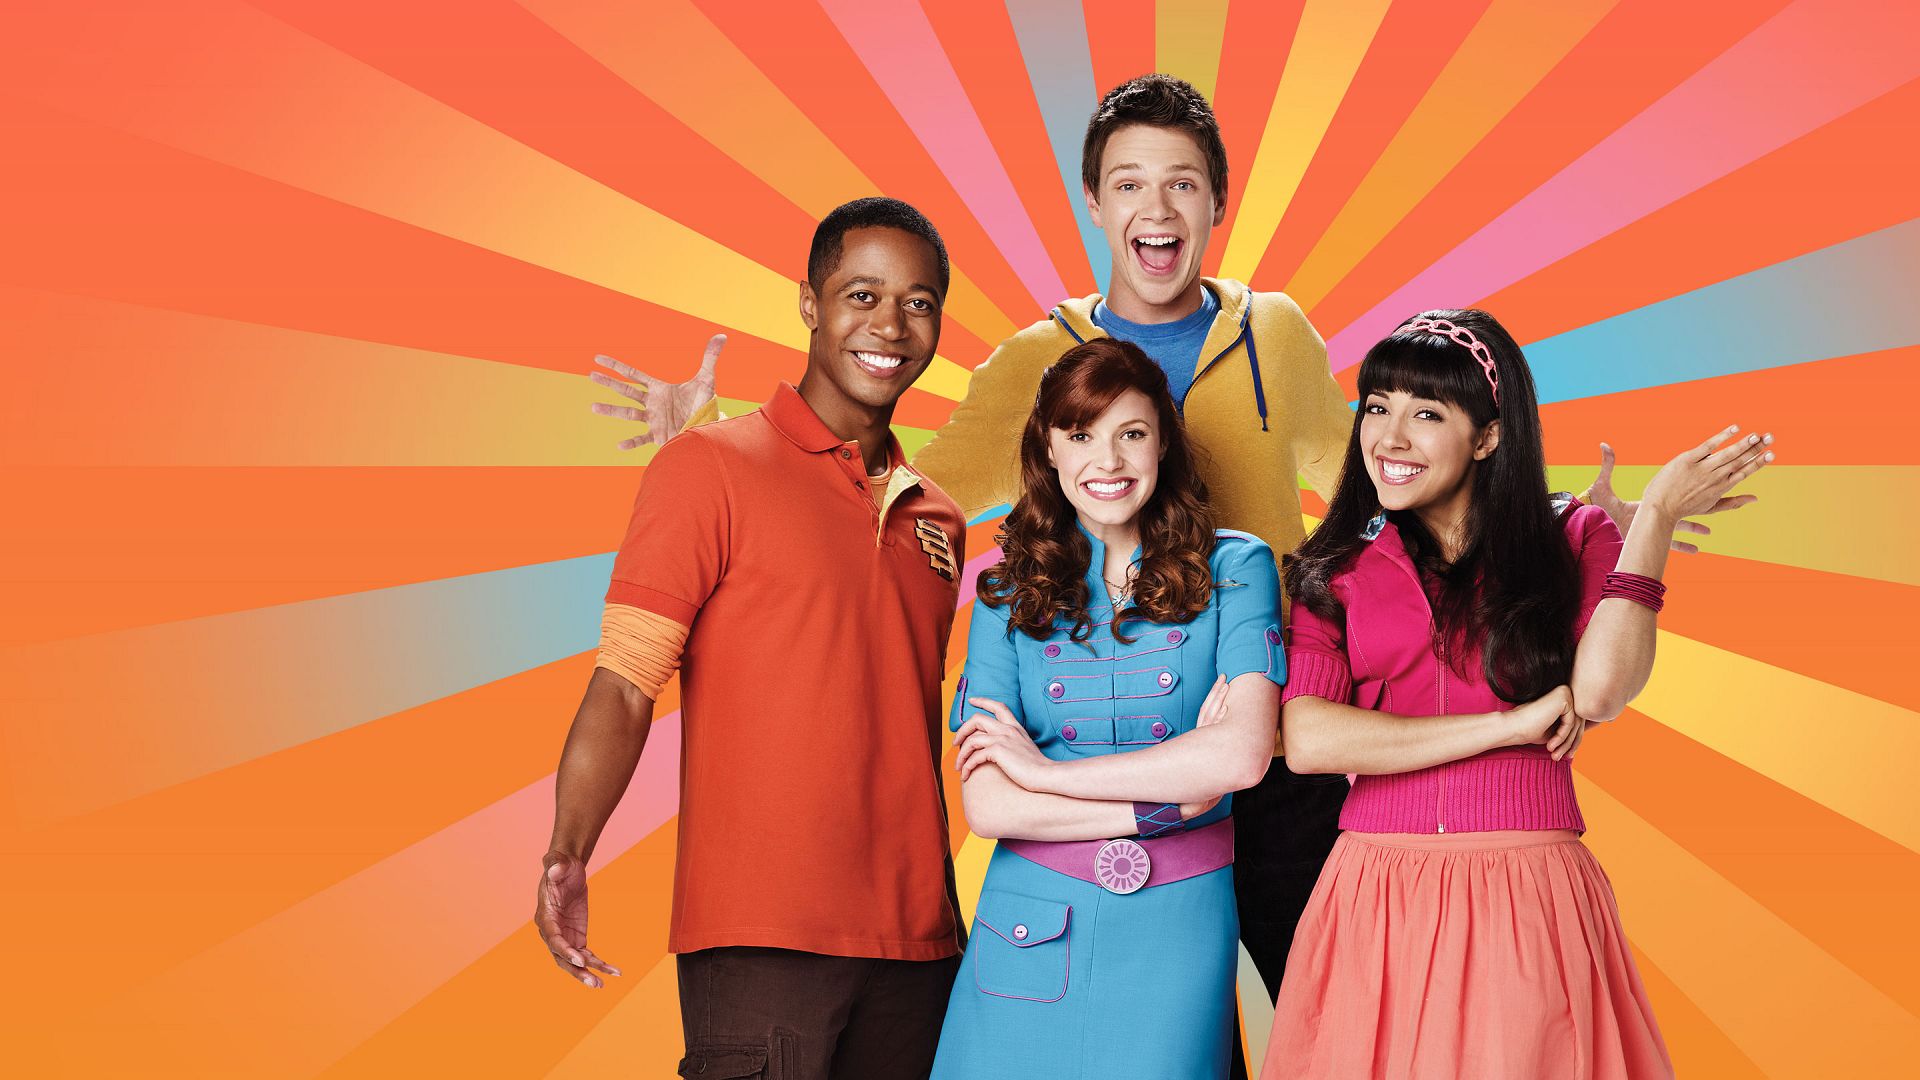 The Fresh Beat Band Wallpapers